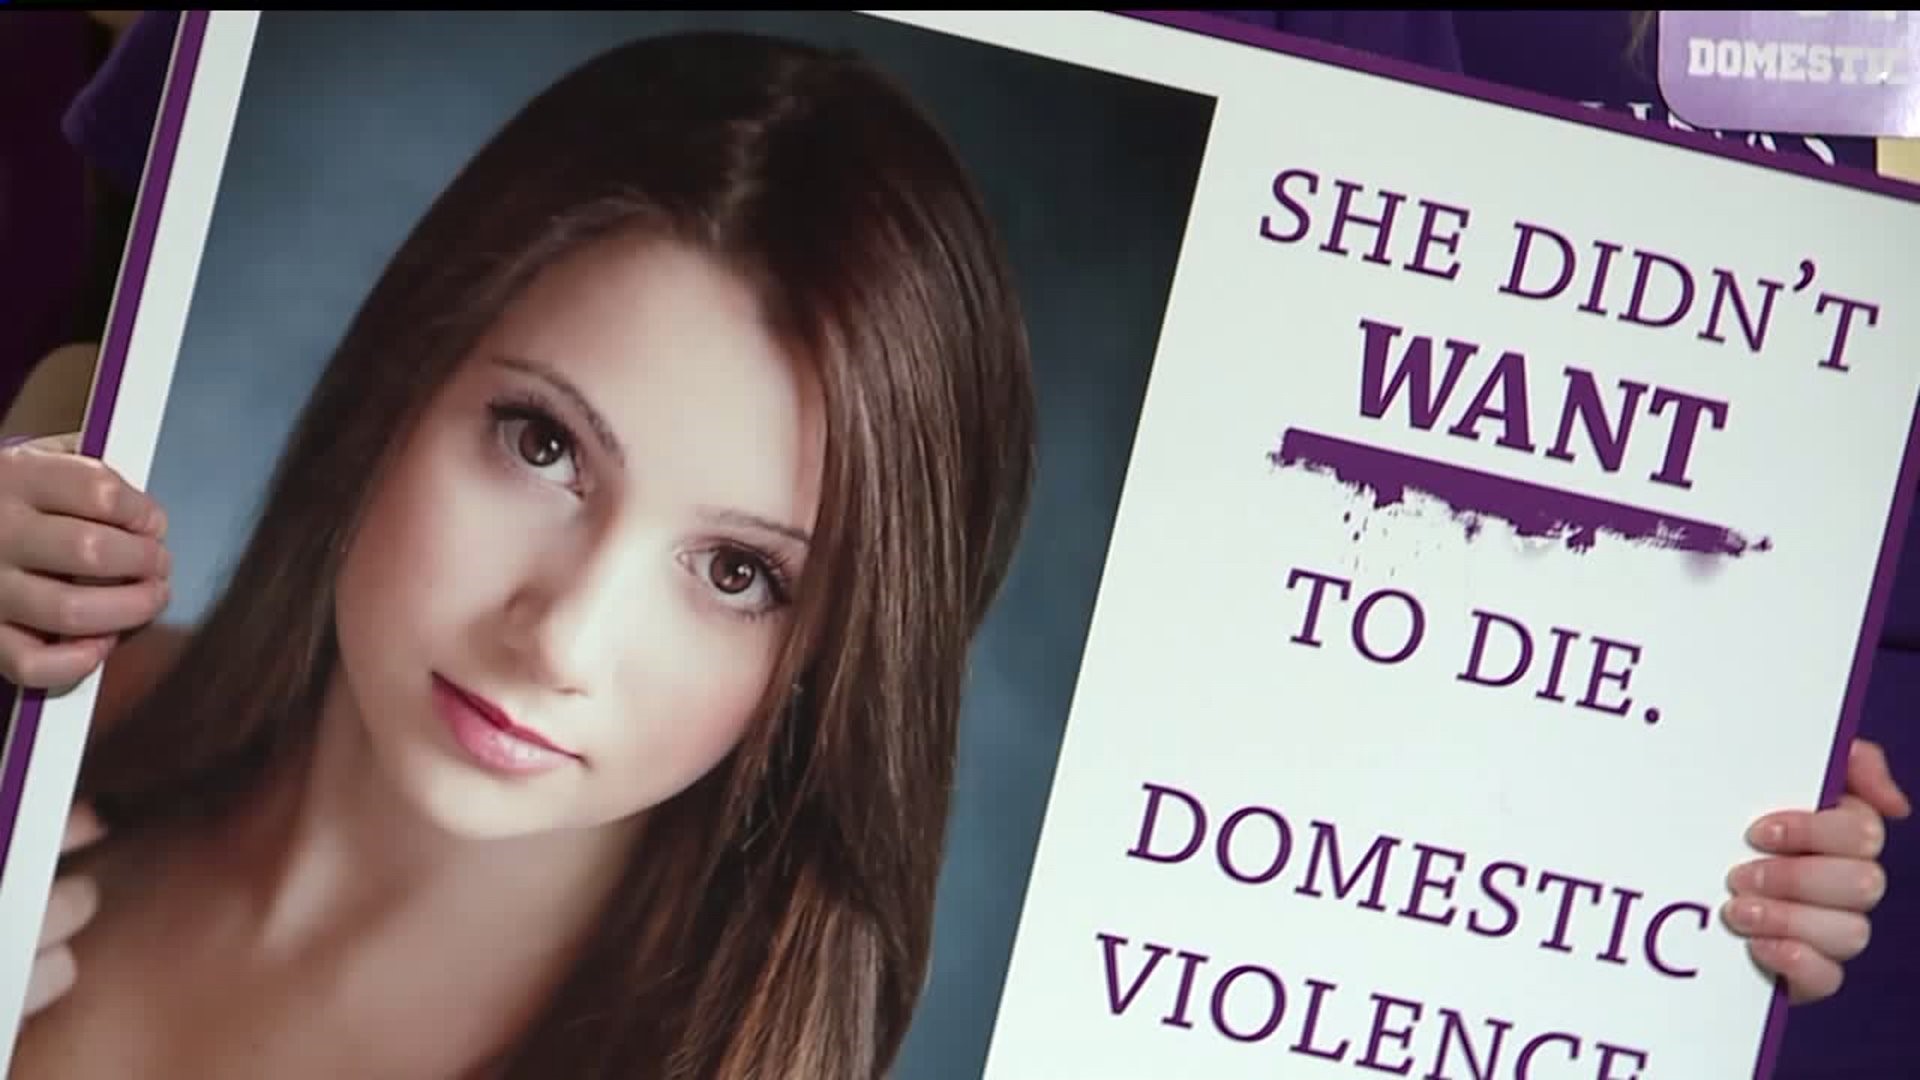 Bill aims to protect domestic violence victims